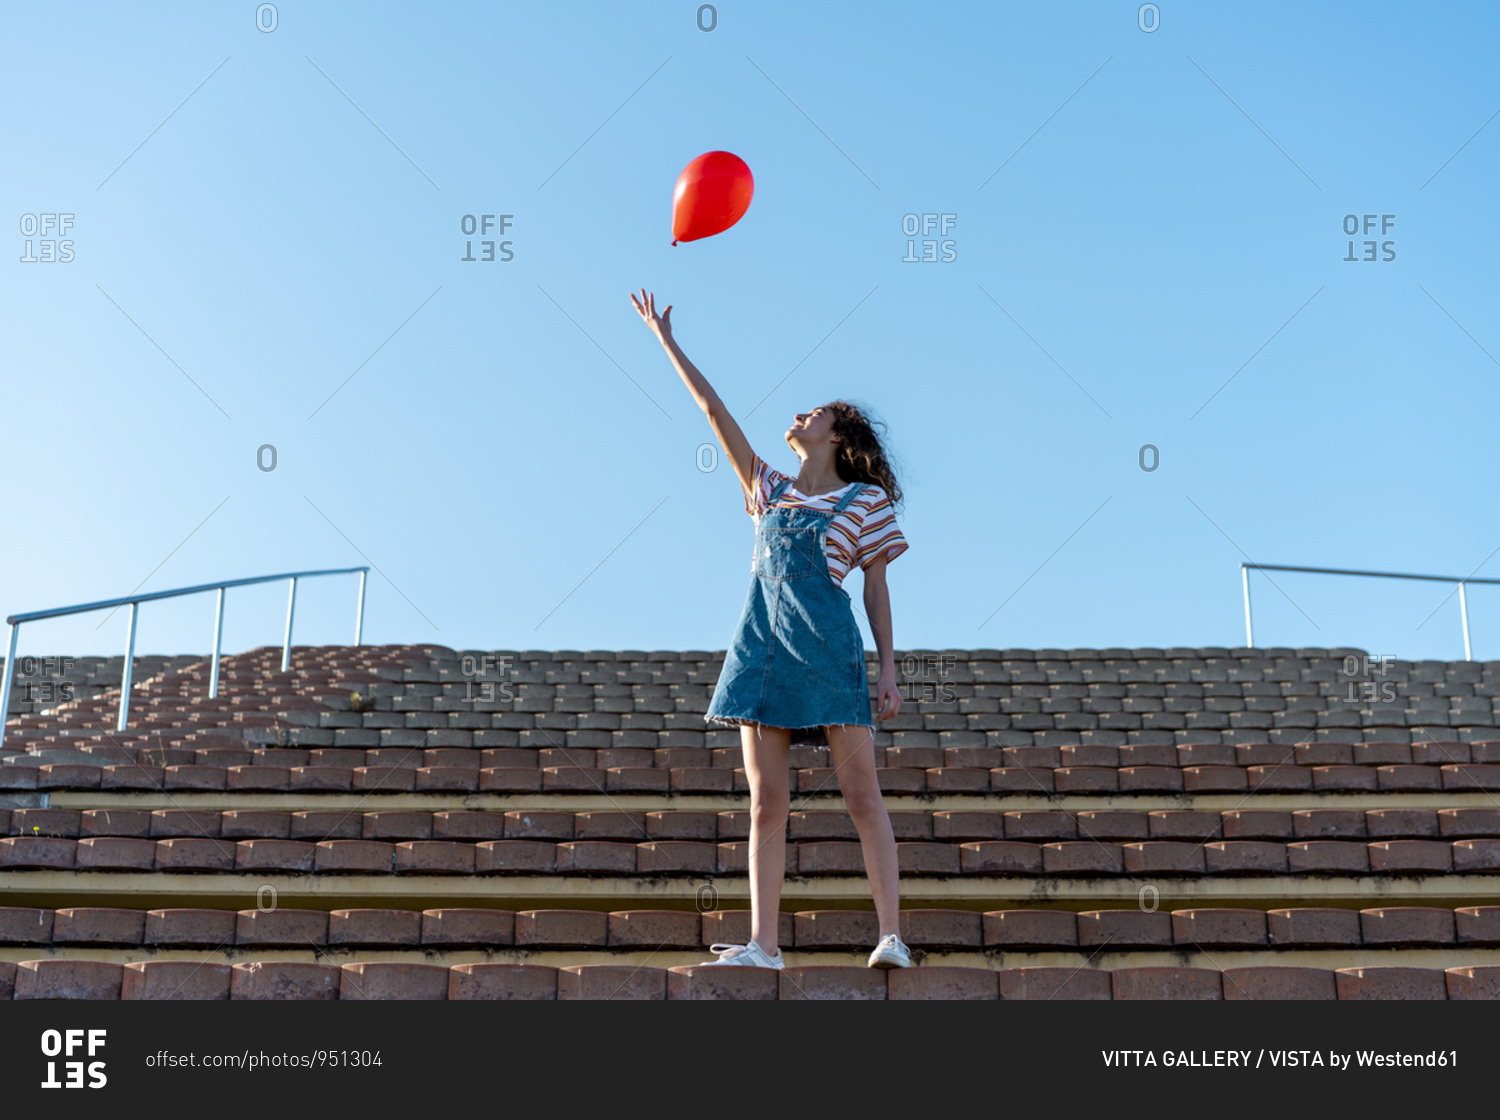 Young woman standing on grandstand- letting go of a red balloon